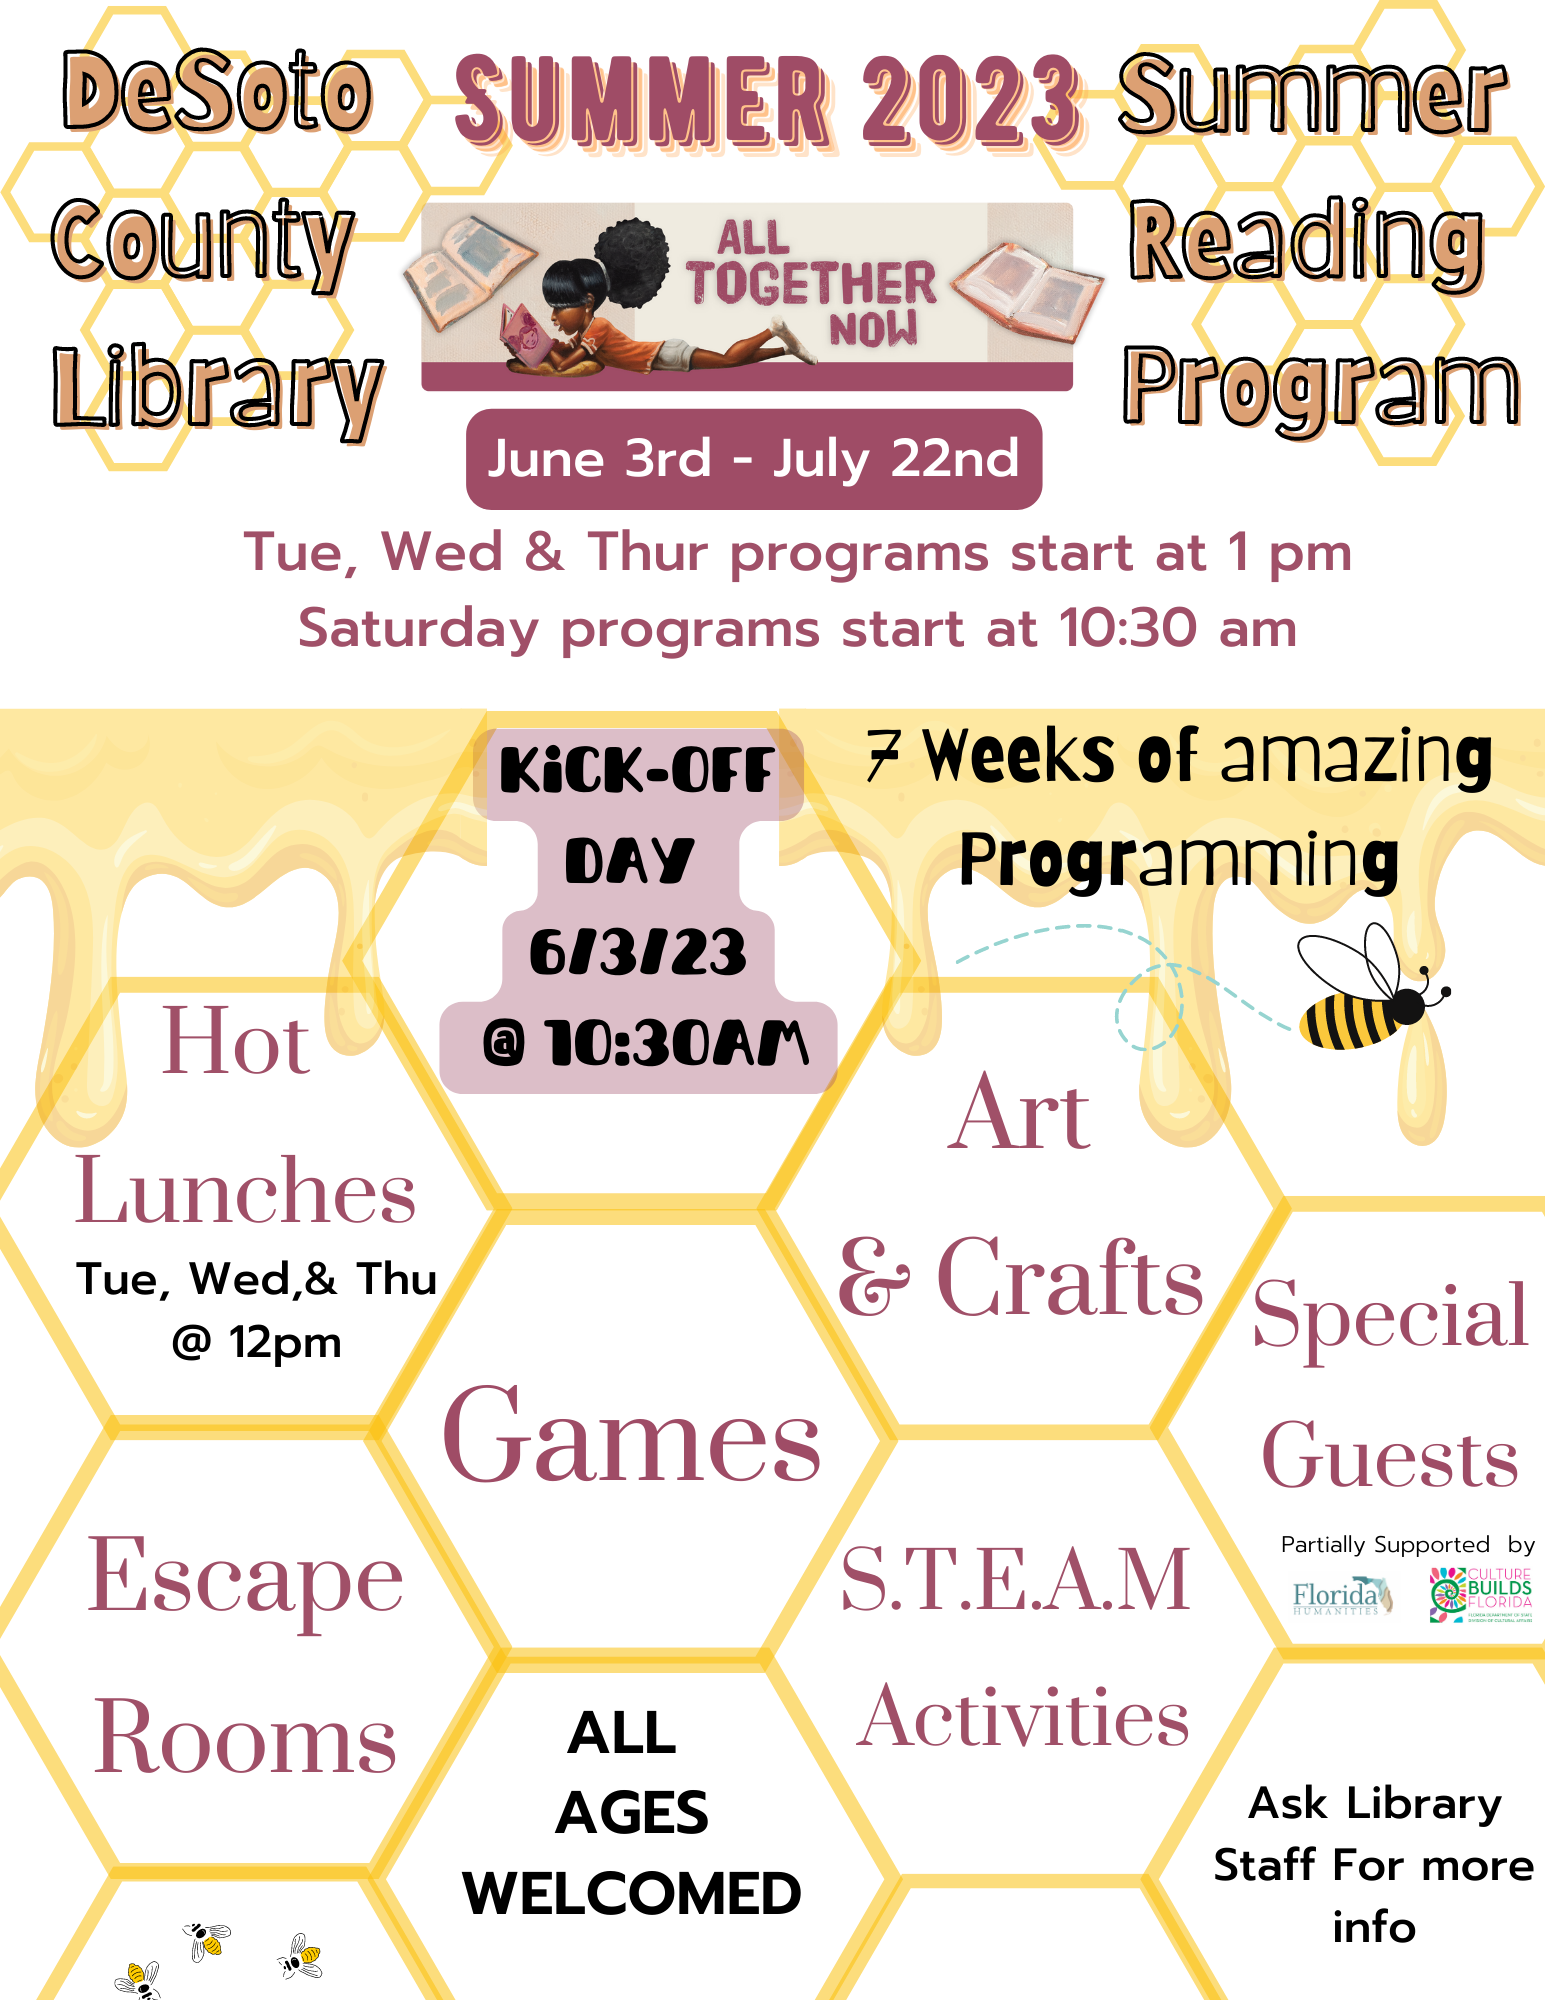 DeSoto County Library Summer reading programs kick off on 6/3/2023 at 10:30 a.m. Ask staff for more info. 